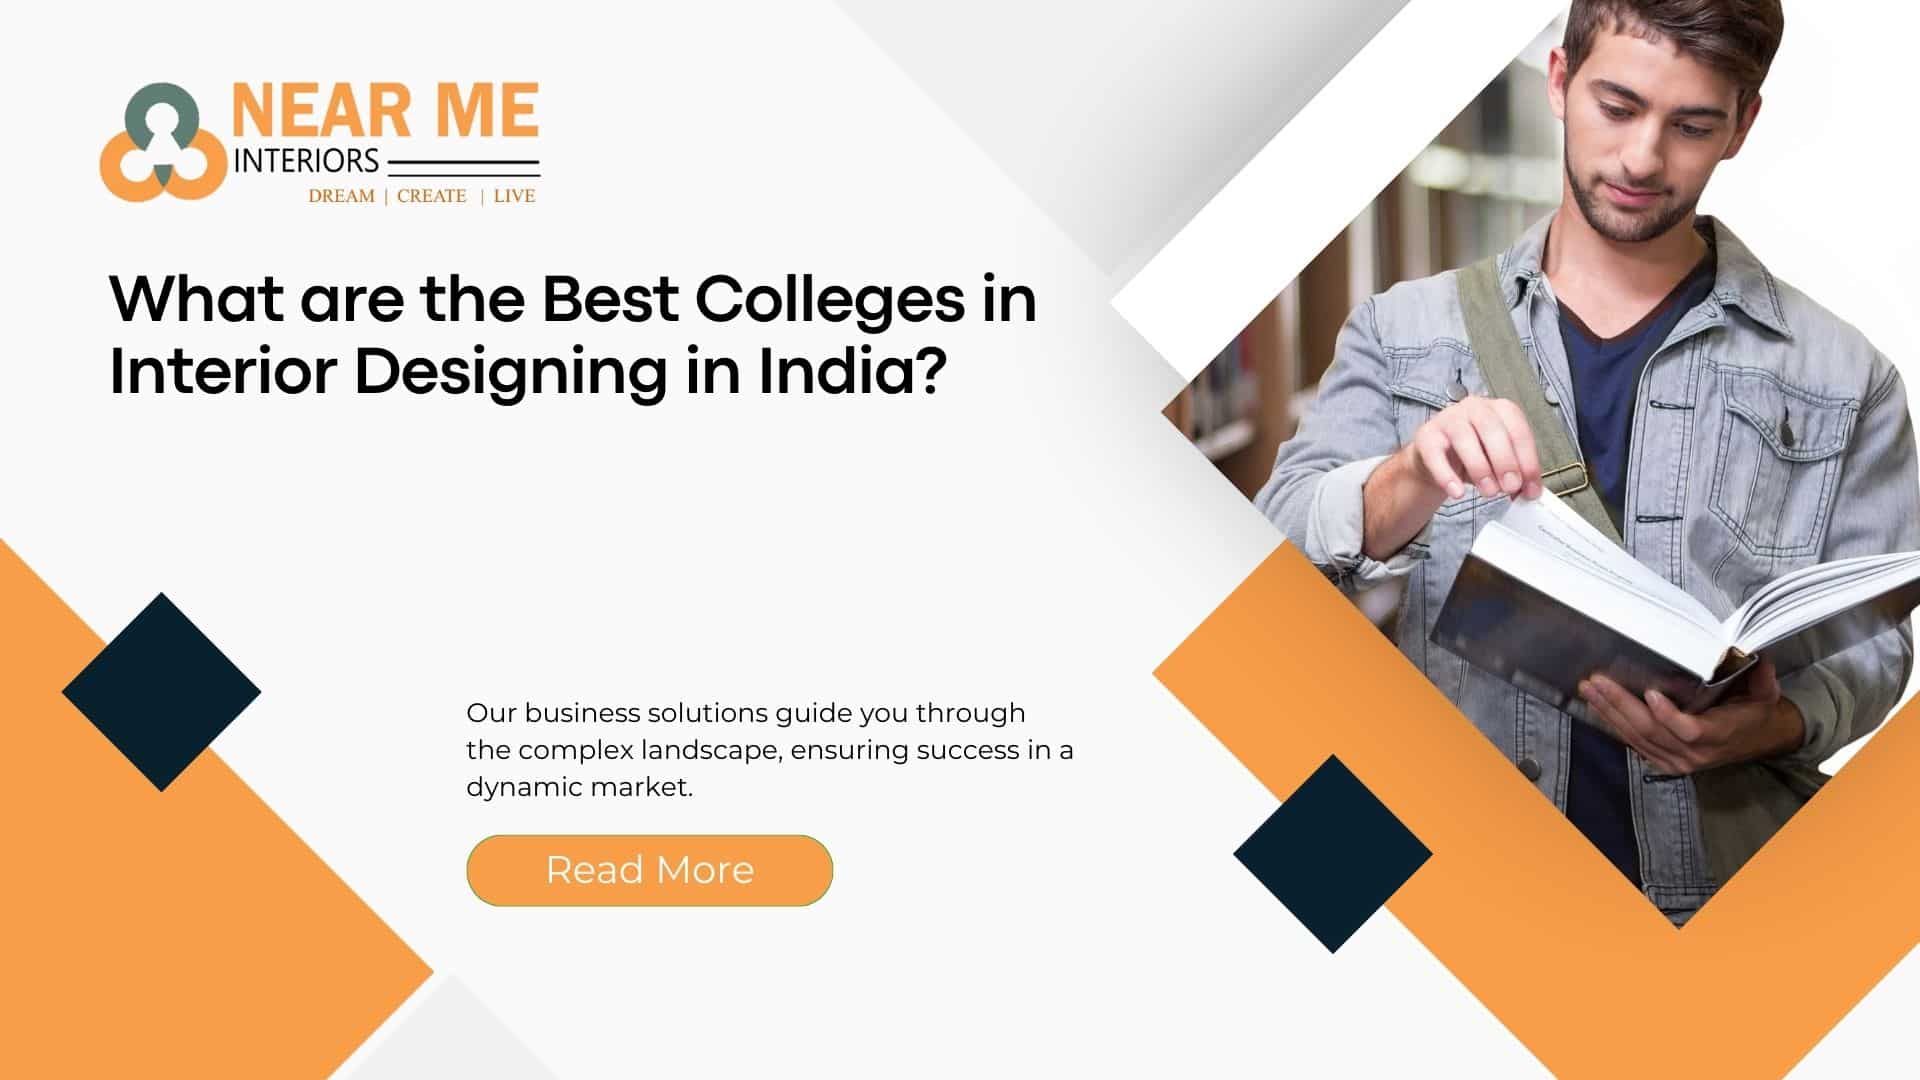 What are the Best Colleges in Interior Designing in India?